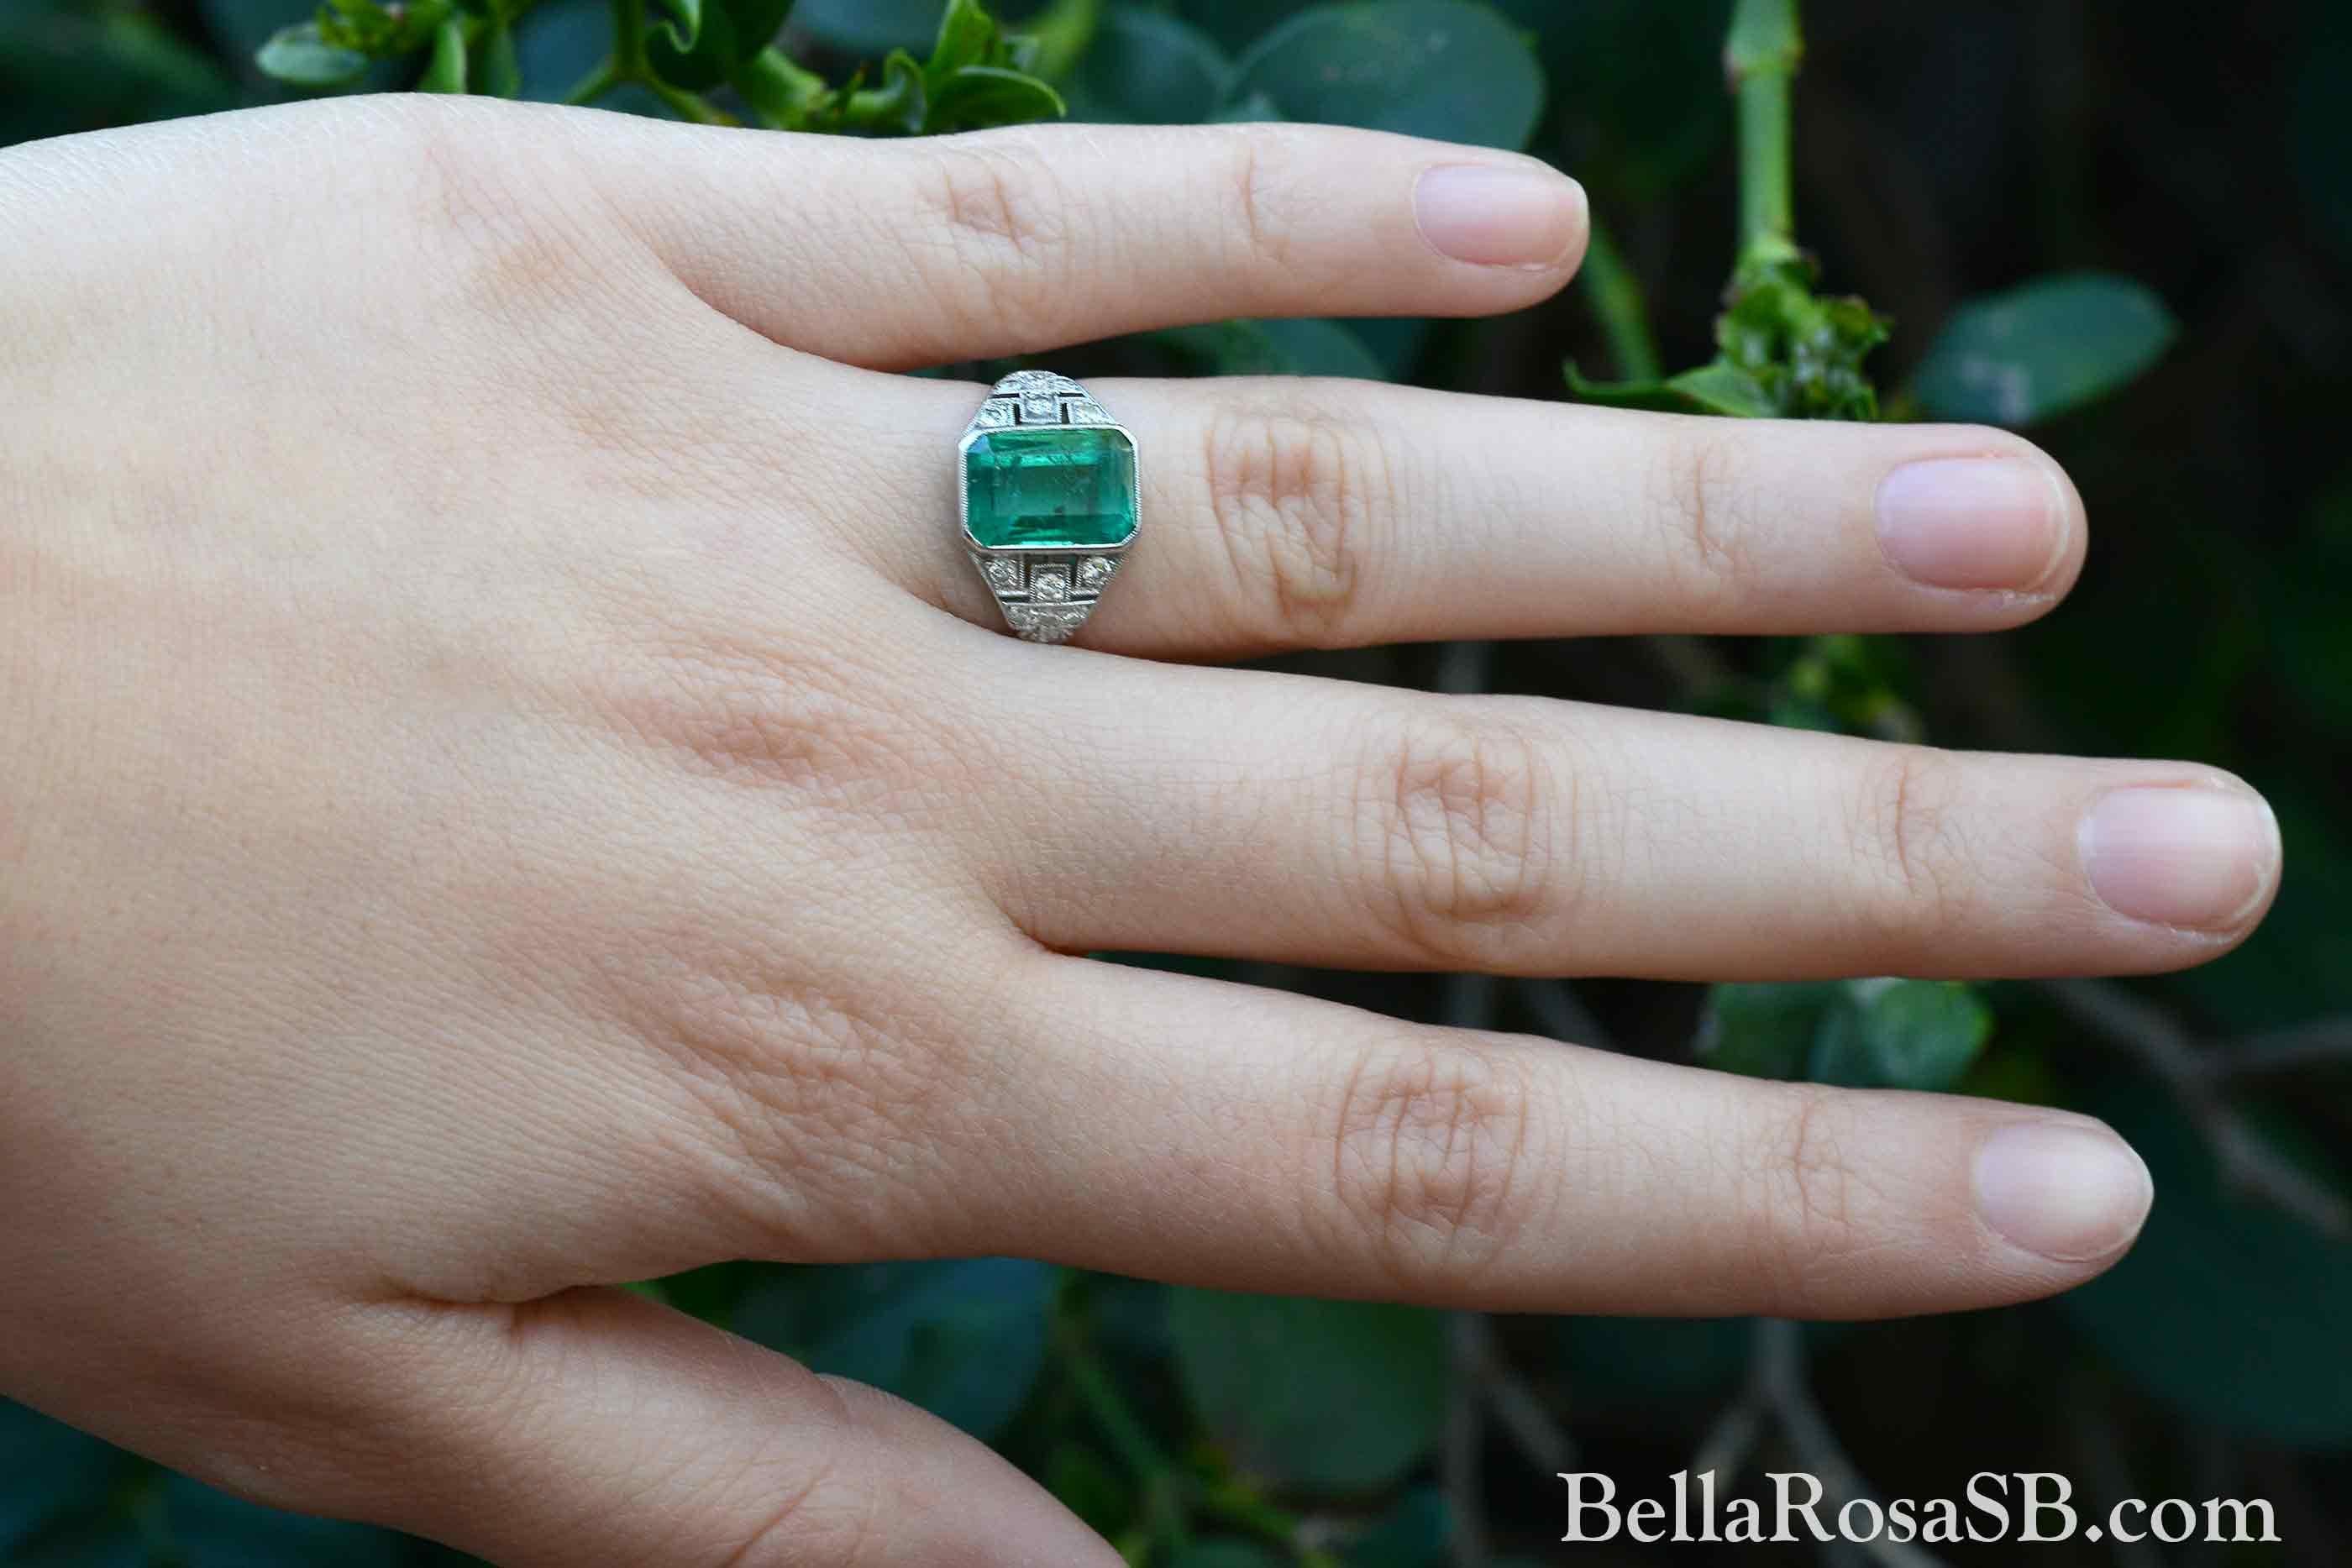 We are pleased to offer this certified Colombian emerald Art Deco Engagement ring. An enchanting green which has inspired generations of collectors to seek Colombian Emeralds for their verdant color. A fine, 3.20 carat gem is the heart of this